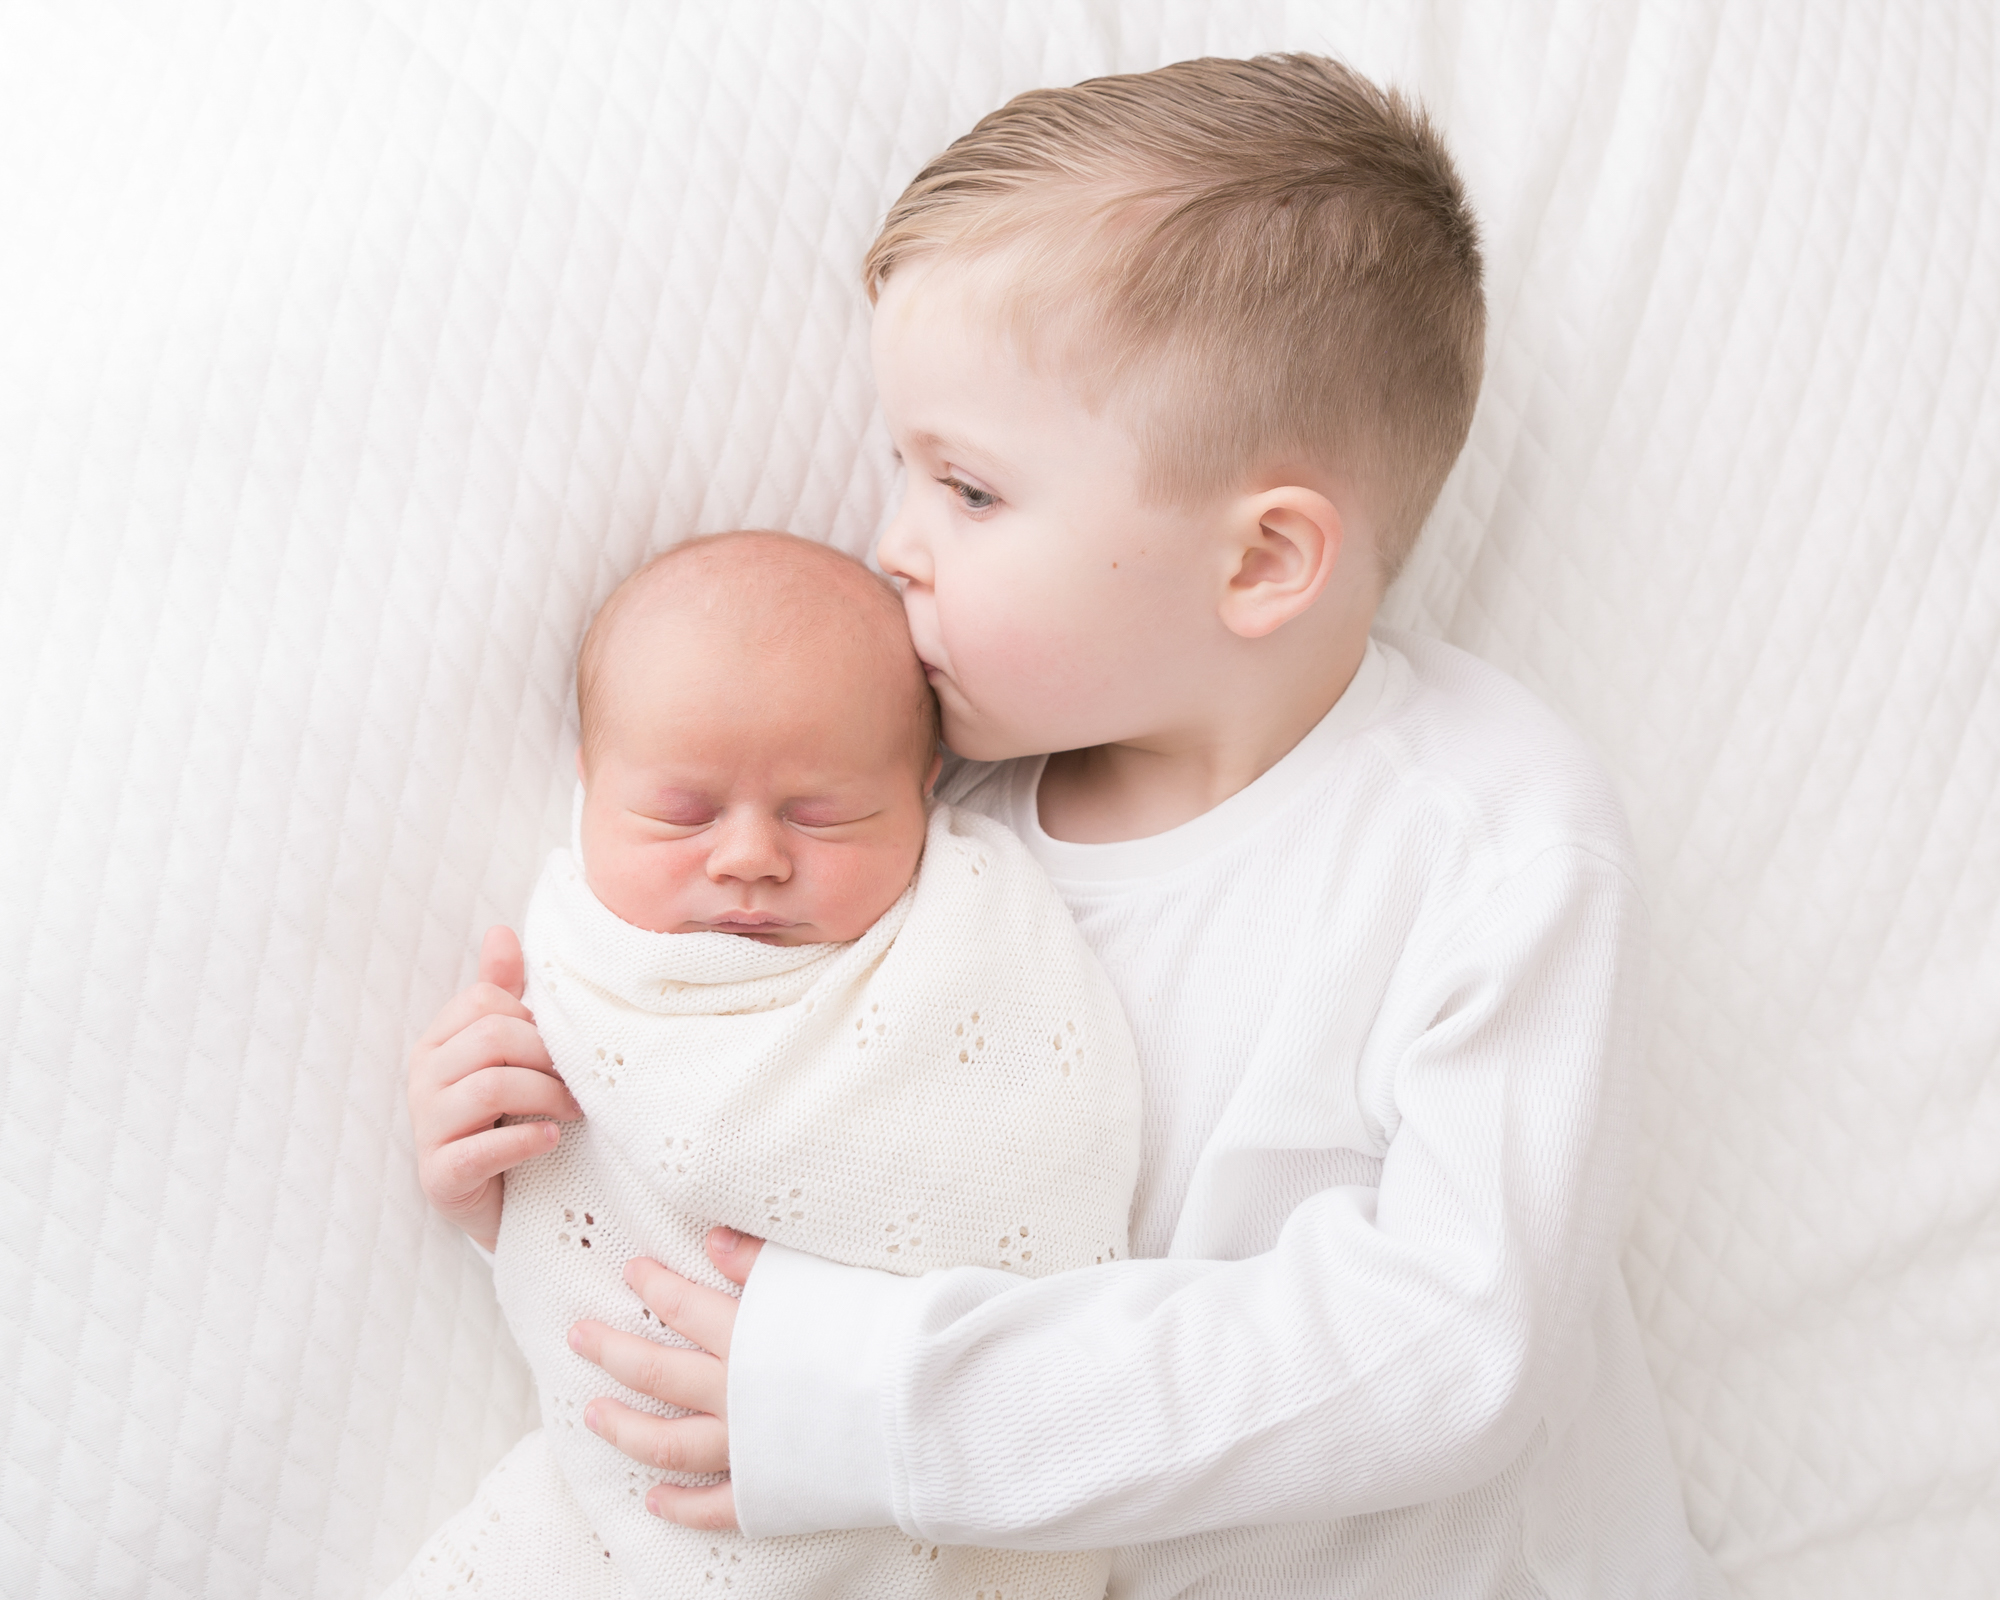 How to choose your newborn photographer